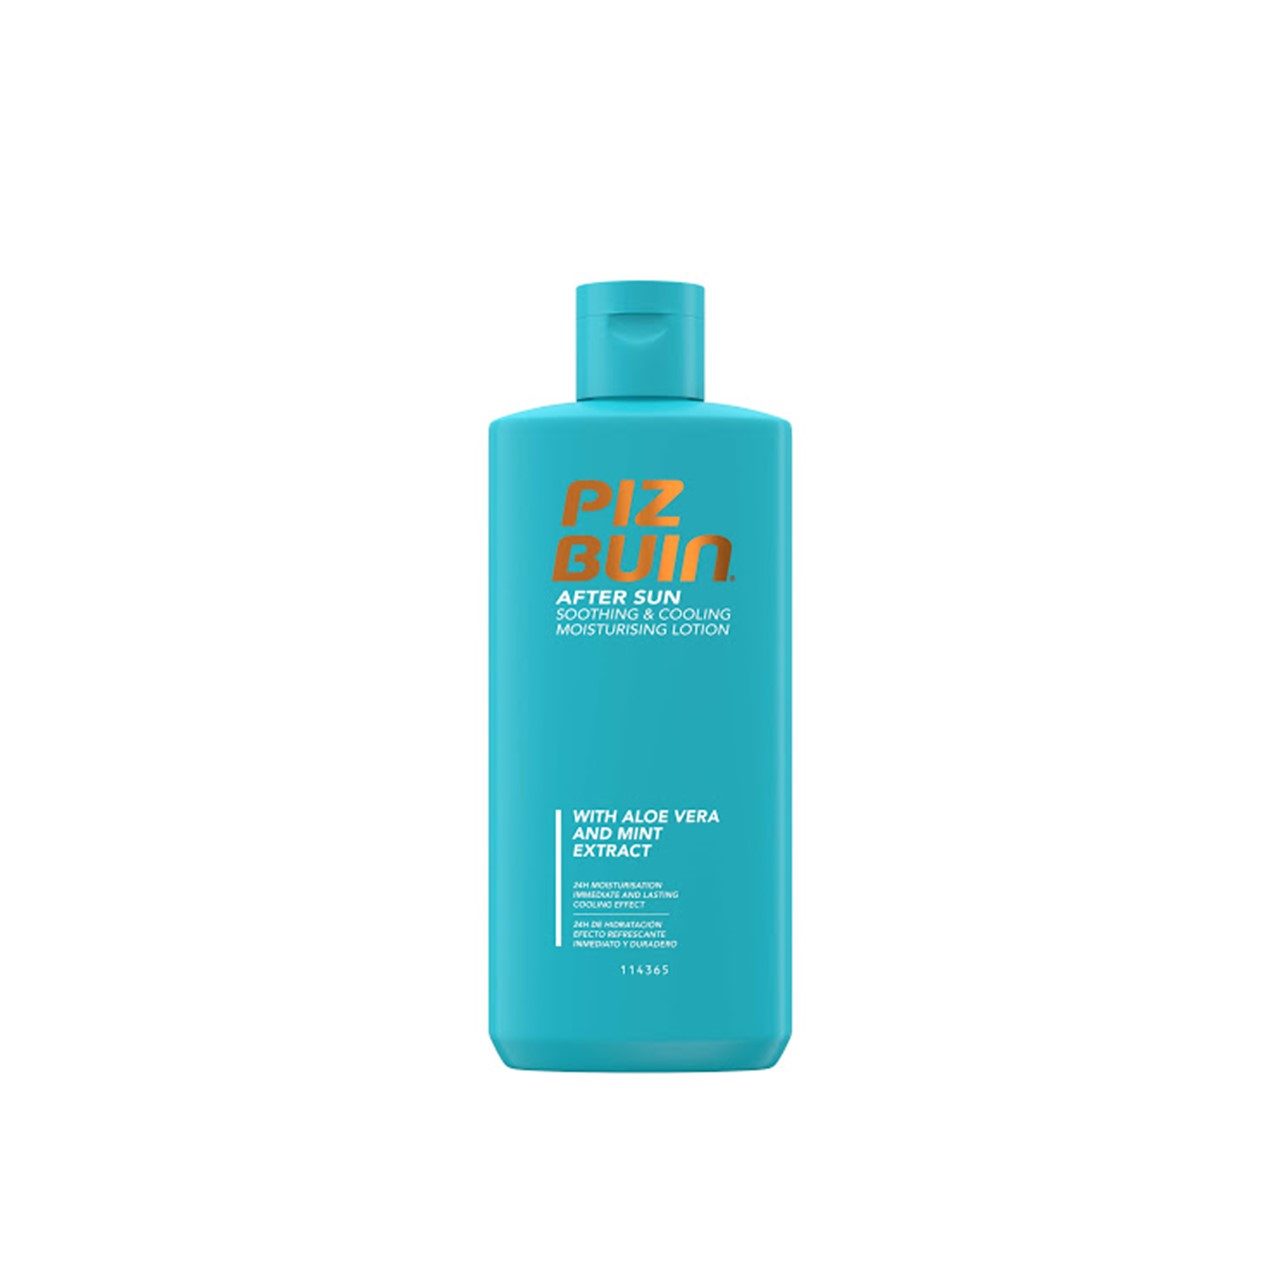 Piz Buin After Sun Soothing & Cooling Moisturizing Lotion 200ml (6.76fl oz)